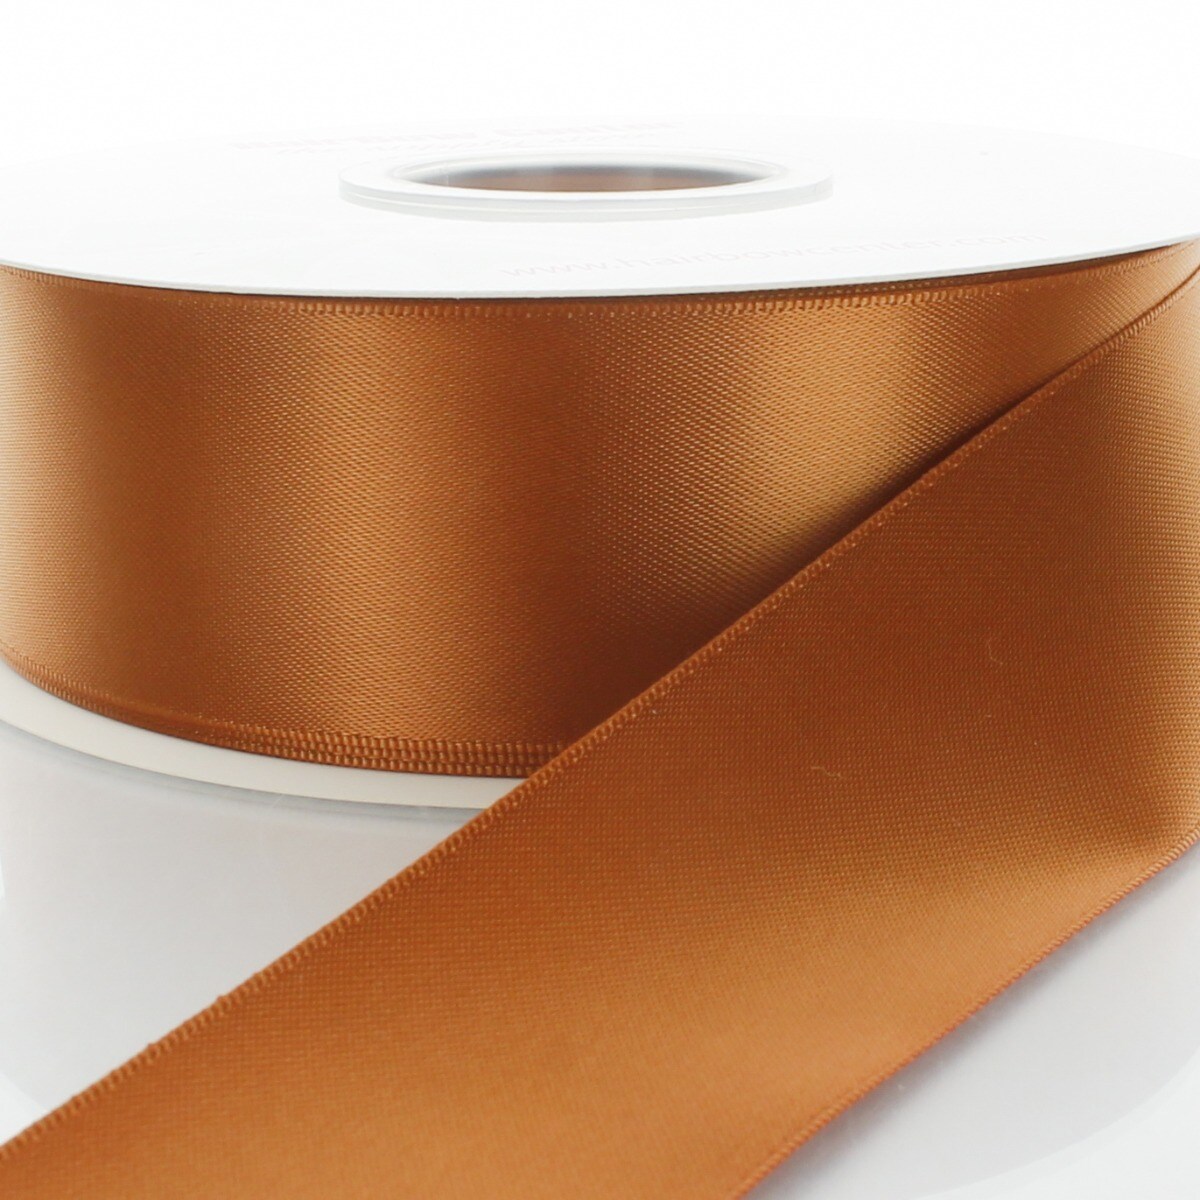 3-double-faced-satin-ribbon-785-copper-3yd-michaels